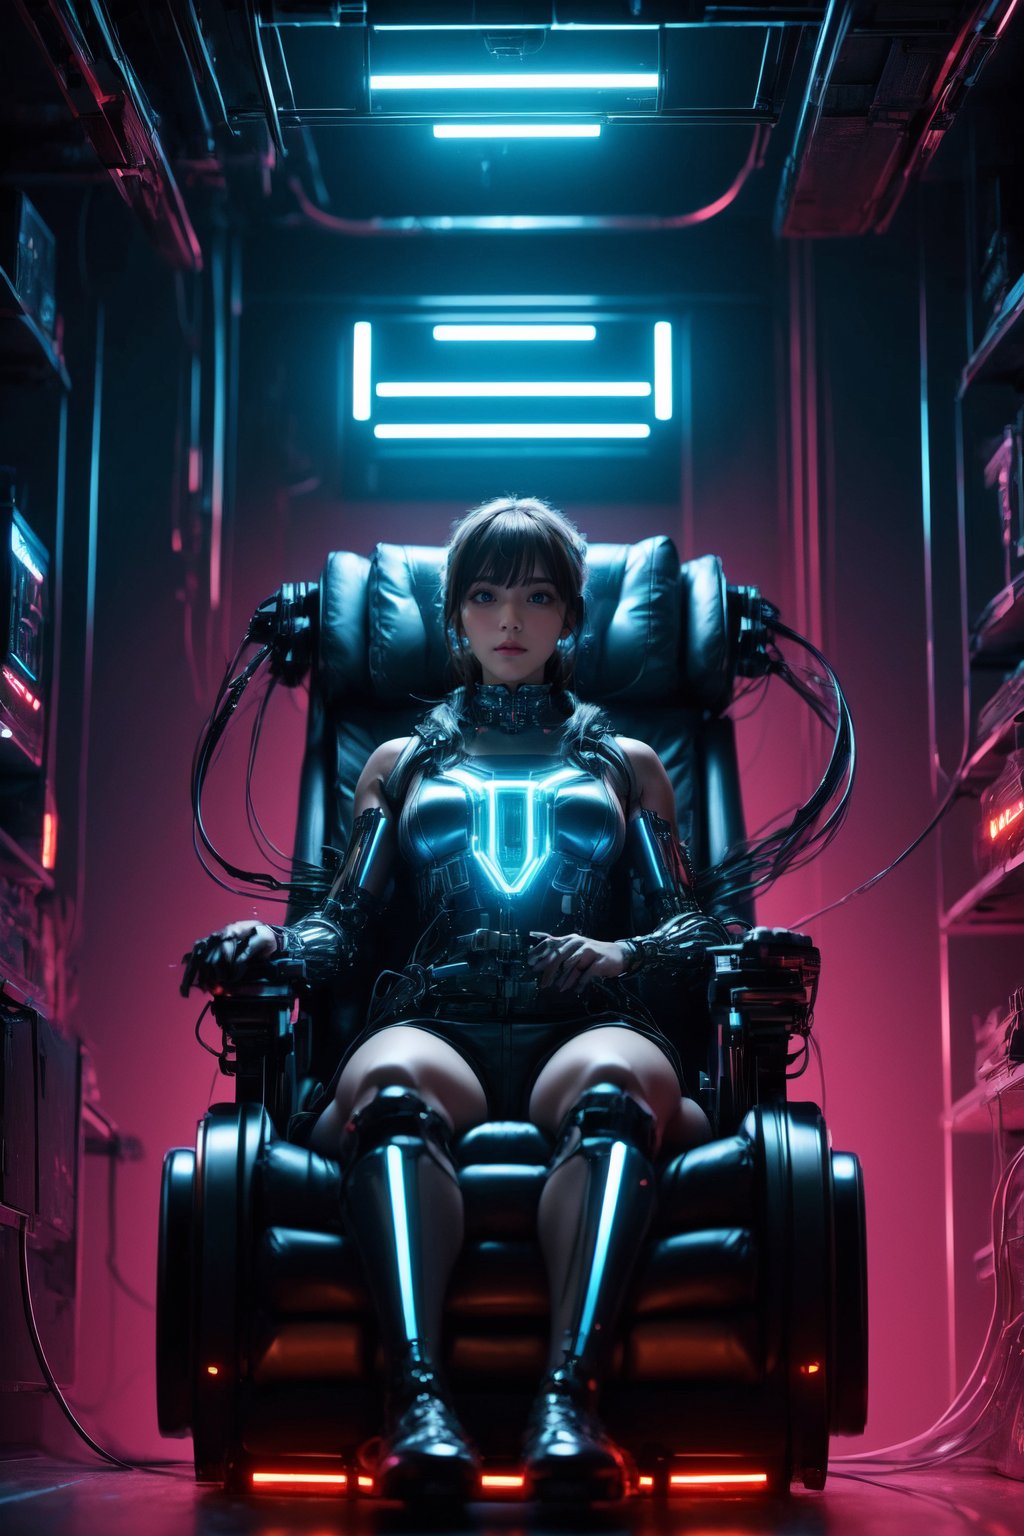 High-quality, ultra-realistic digital painting, 64K HDR, luminously lit cyberpunk lab setting with a female figure clad in mecha-style armor seated in a power chair, encircled by advanced cables and high-tech devices, balanced composition, (Cyberpunk theme:1.4), (Armored techno-girl:1.3), (power chair:1.2), created by FuturEvoLab, cutting-edge technology, sleek metallic surfaces, vivid neon contrasts, lively environment, forward-looking design.